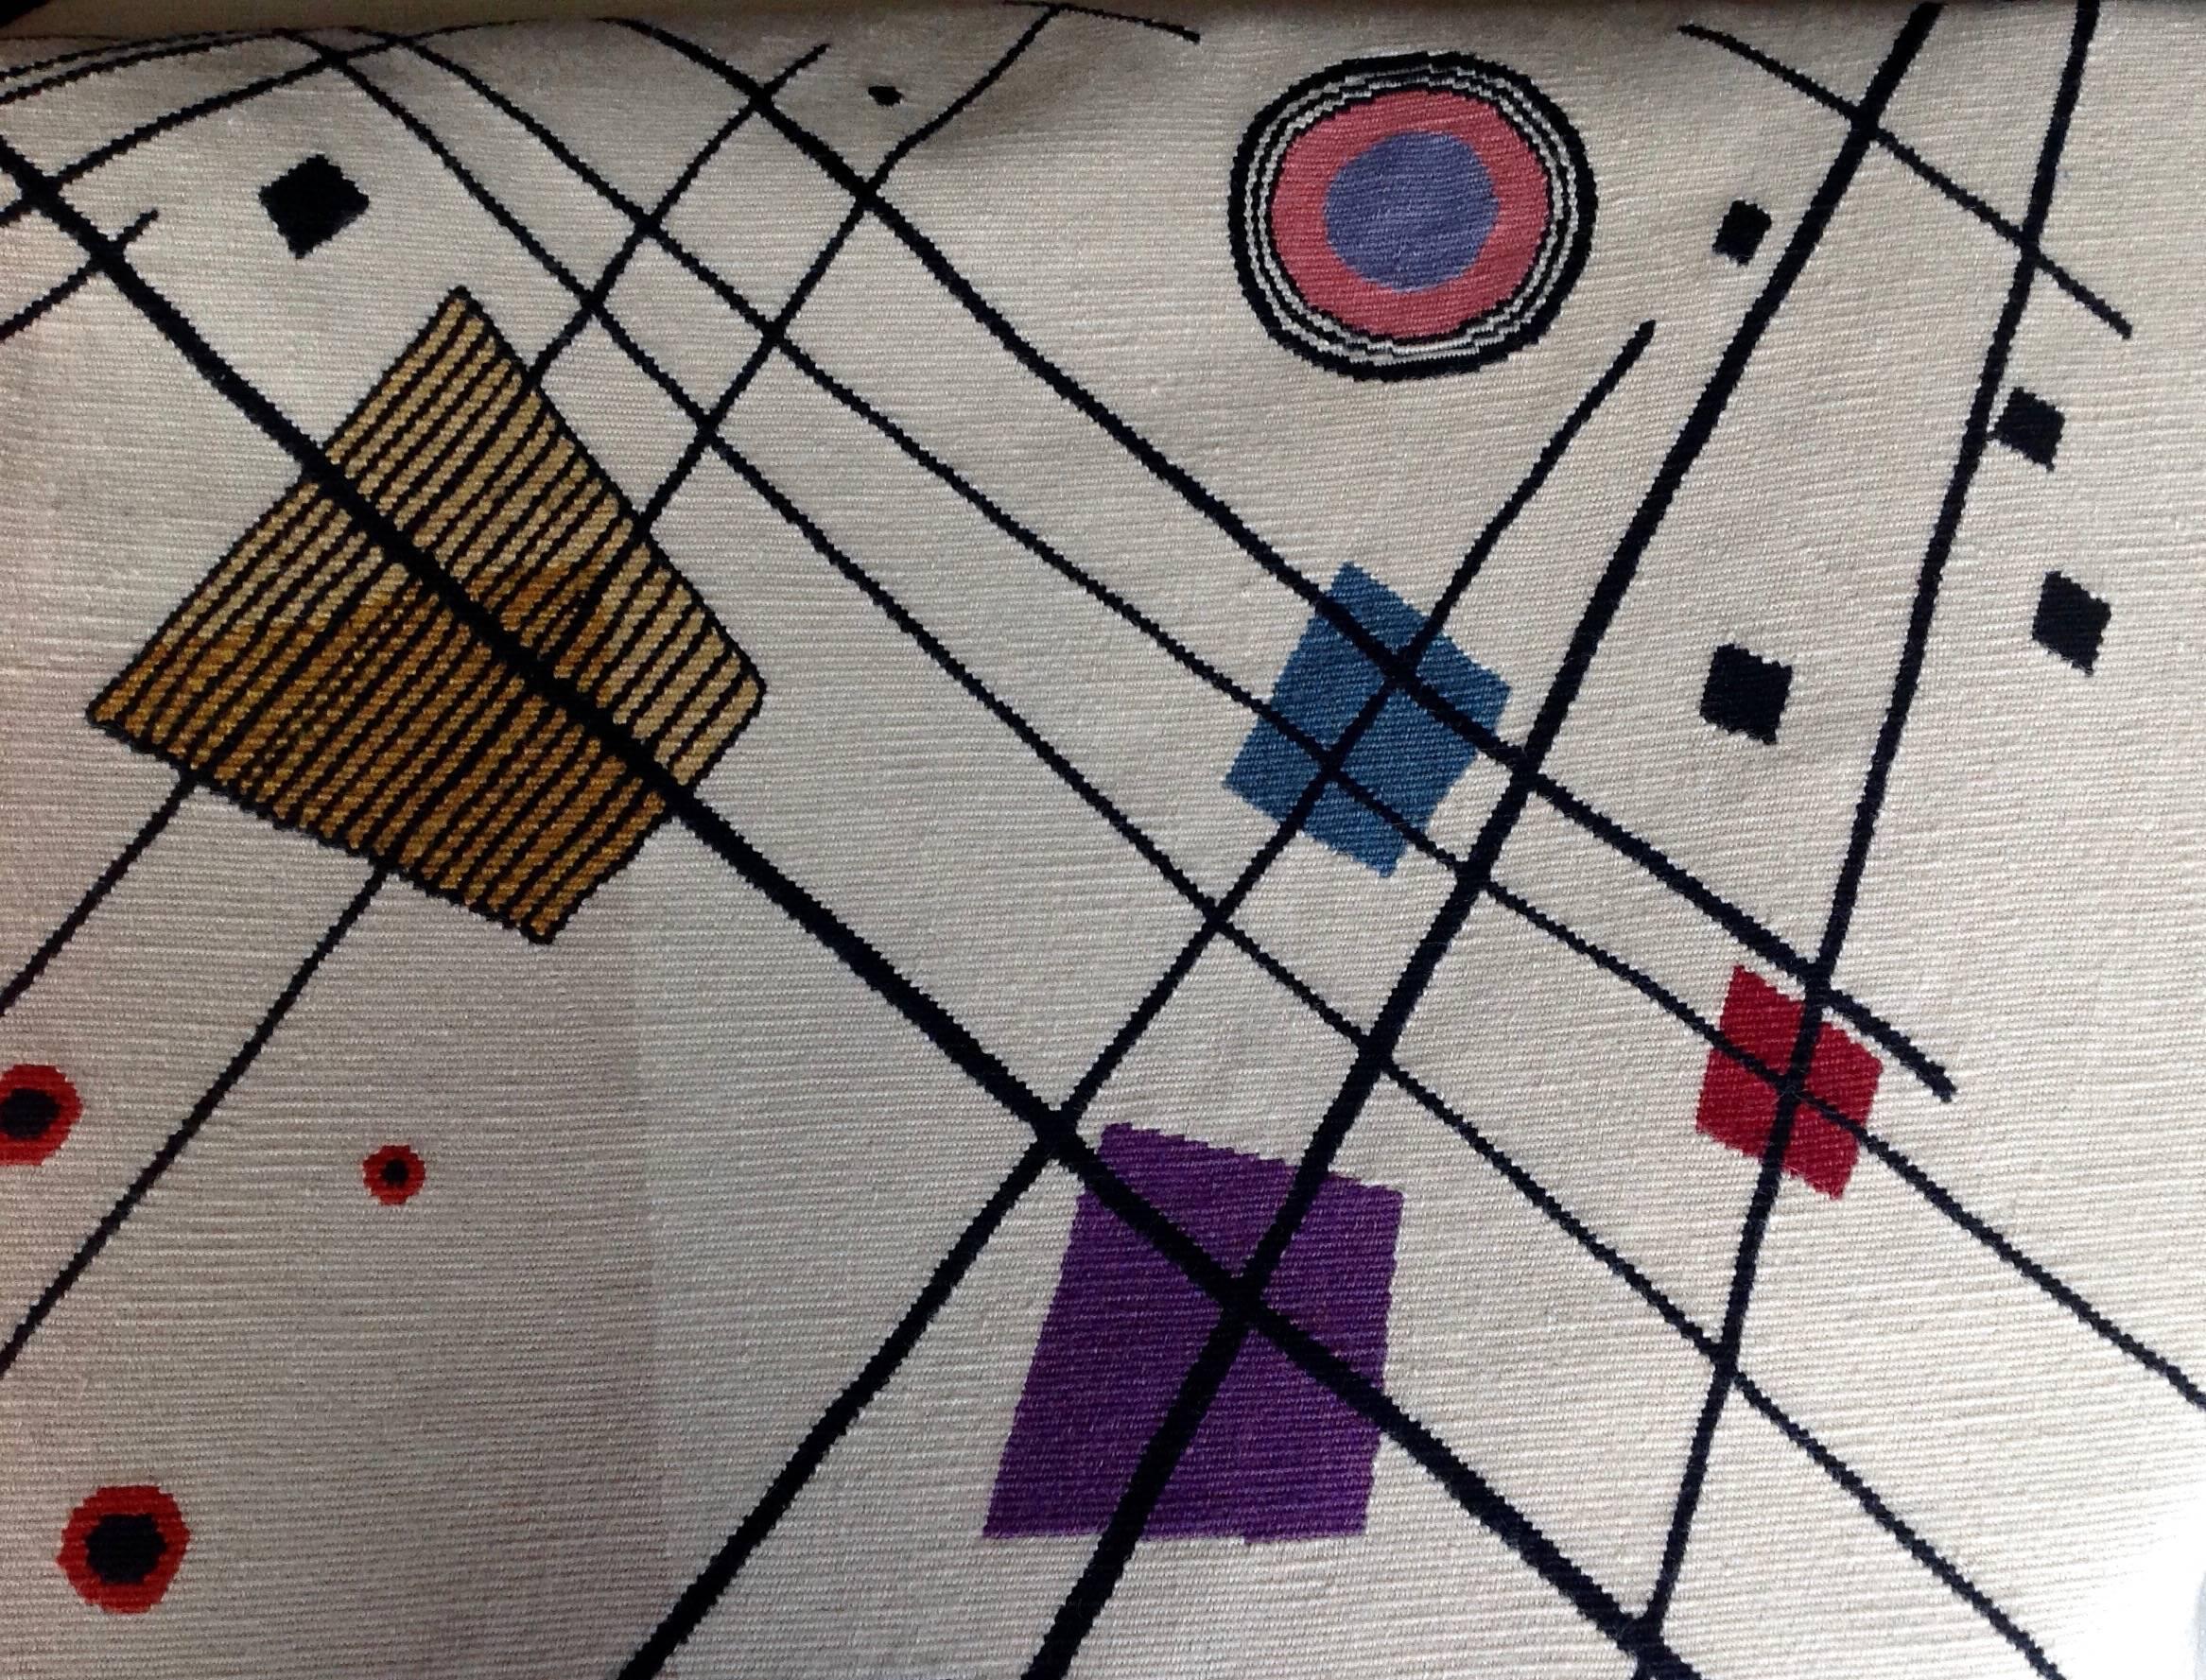 Hand-Woven Aubusson Tapestry after Wassily Kandinsky